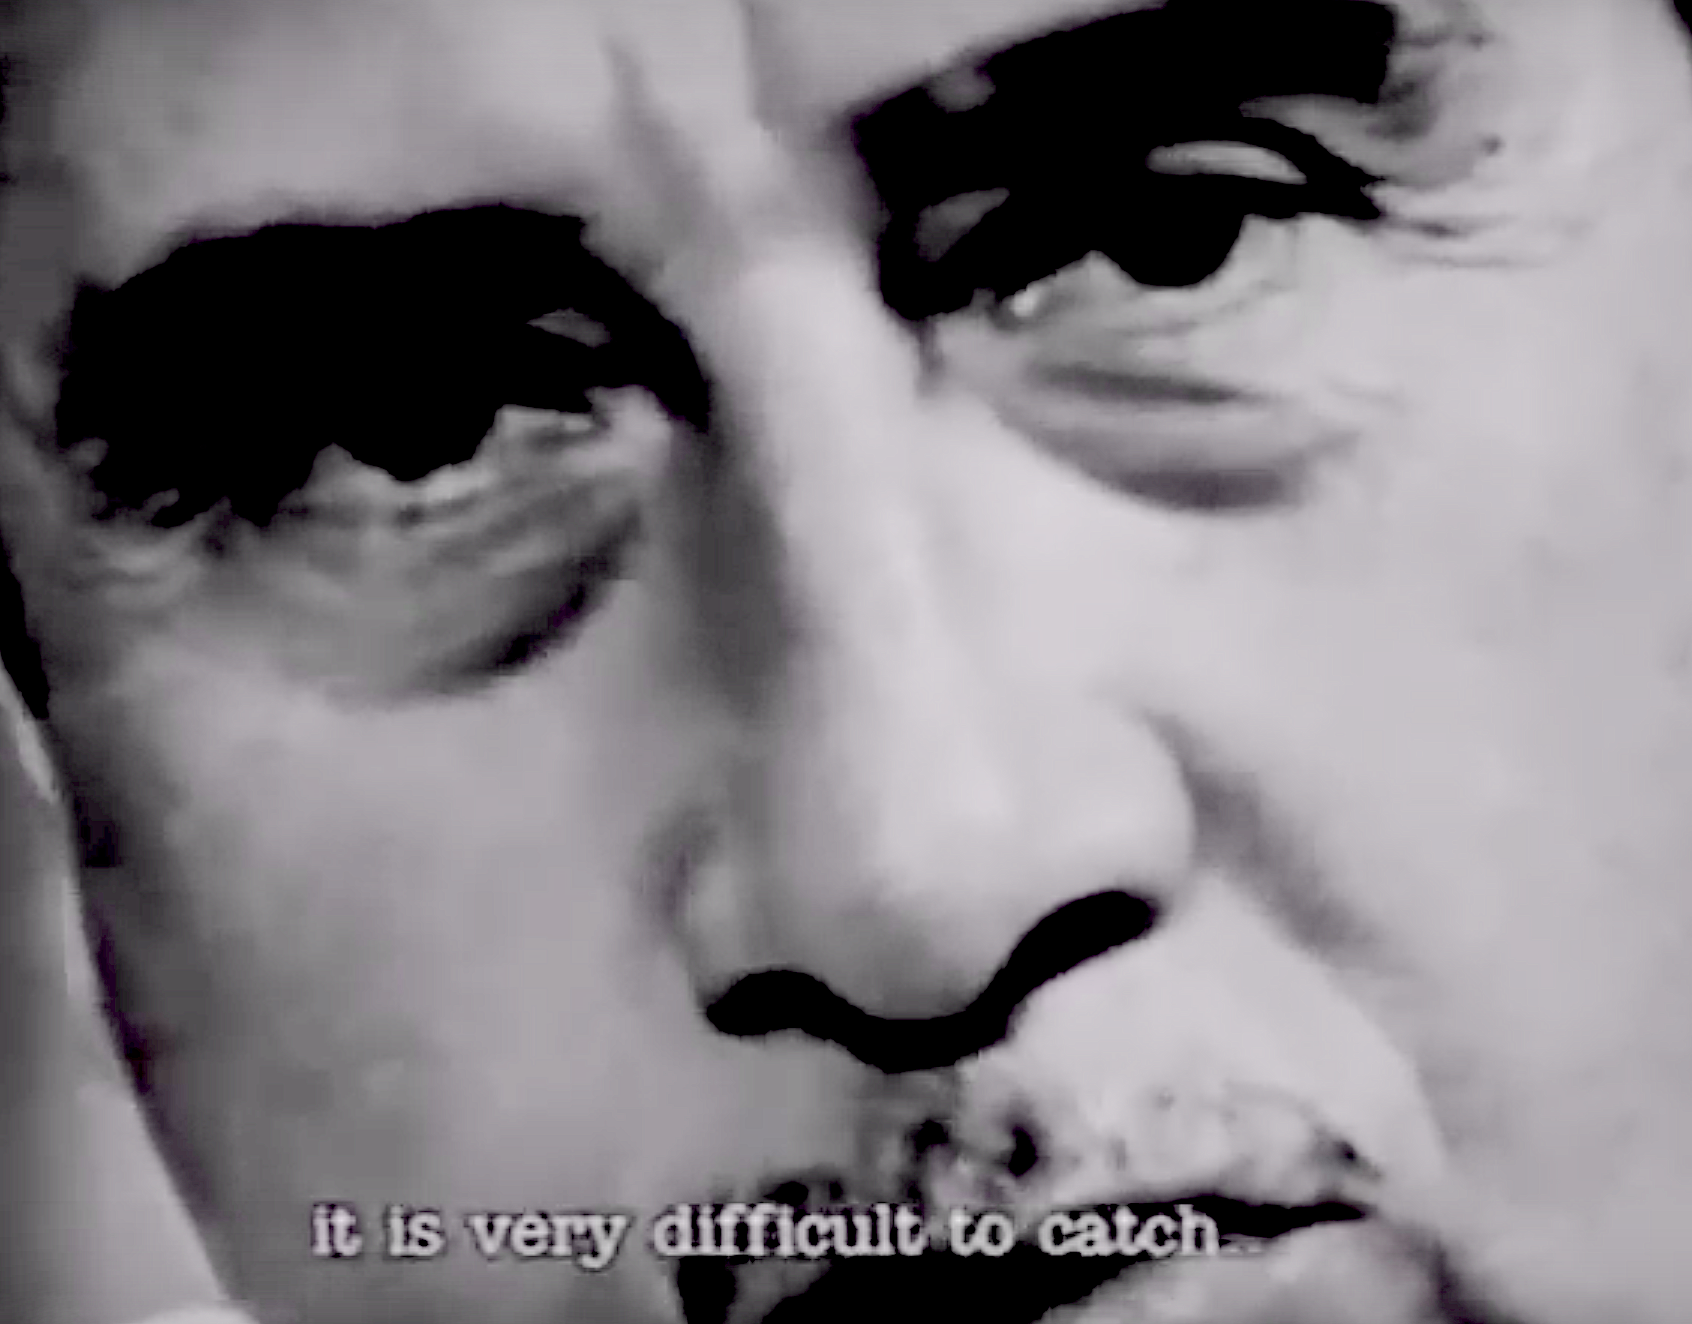 10 Pinochet Very difficult to catch.png